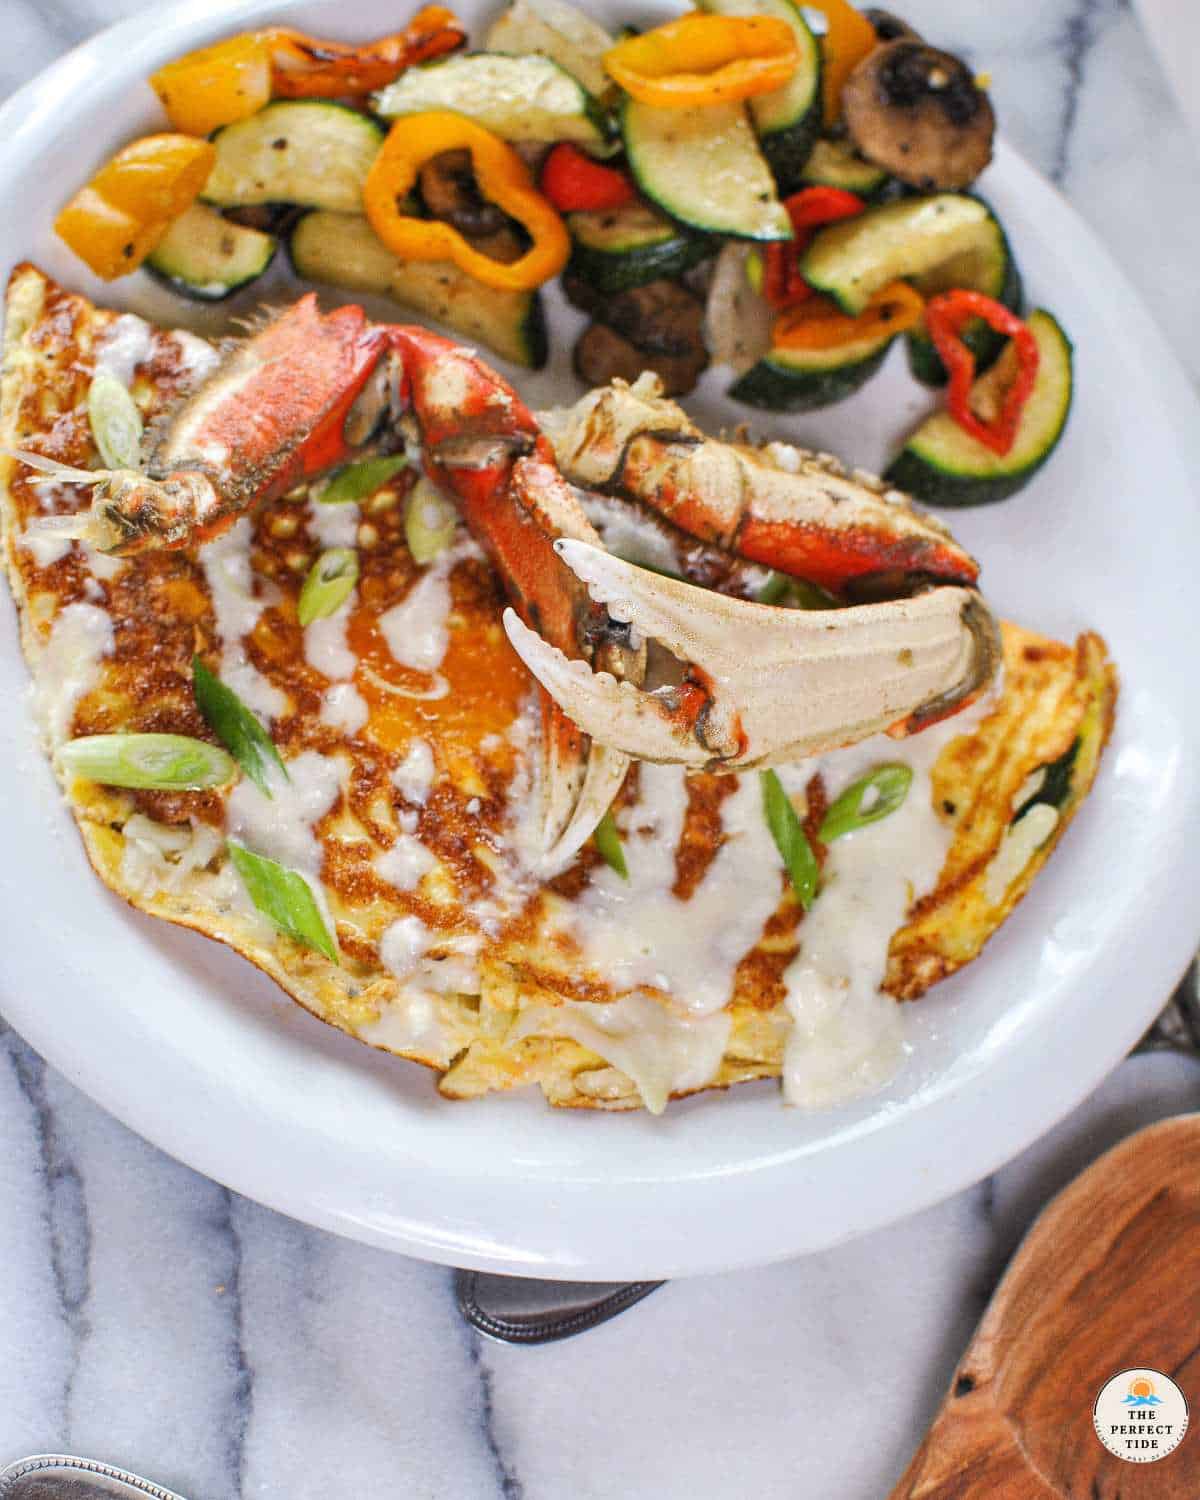 crab omelette with crab legs to garnish on white plate with grilled veggies